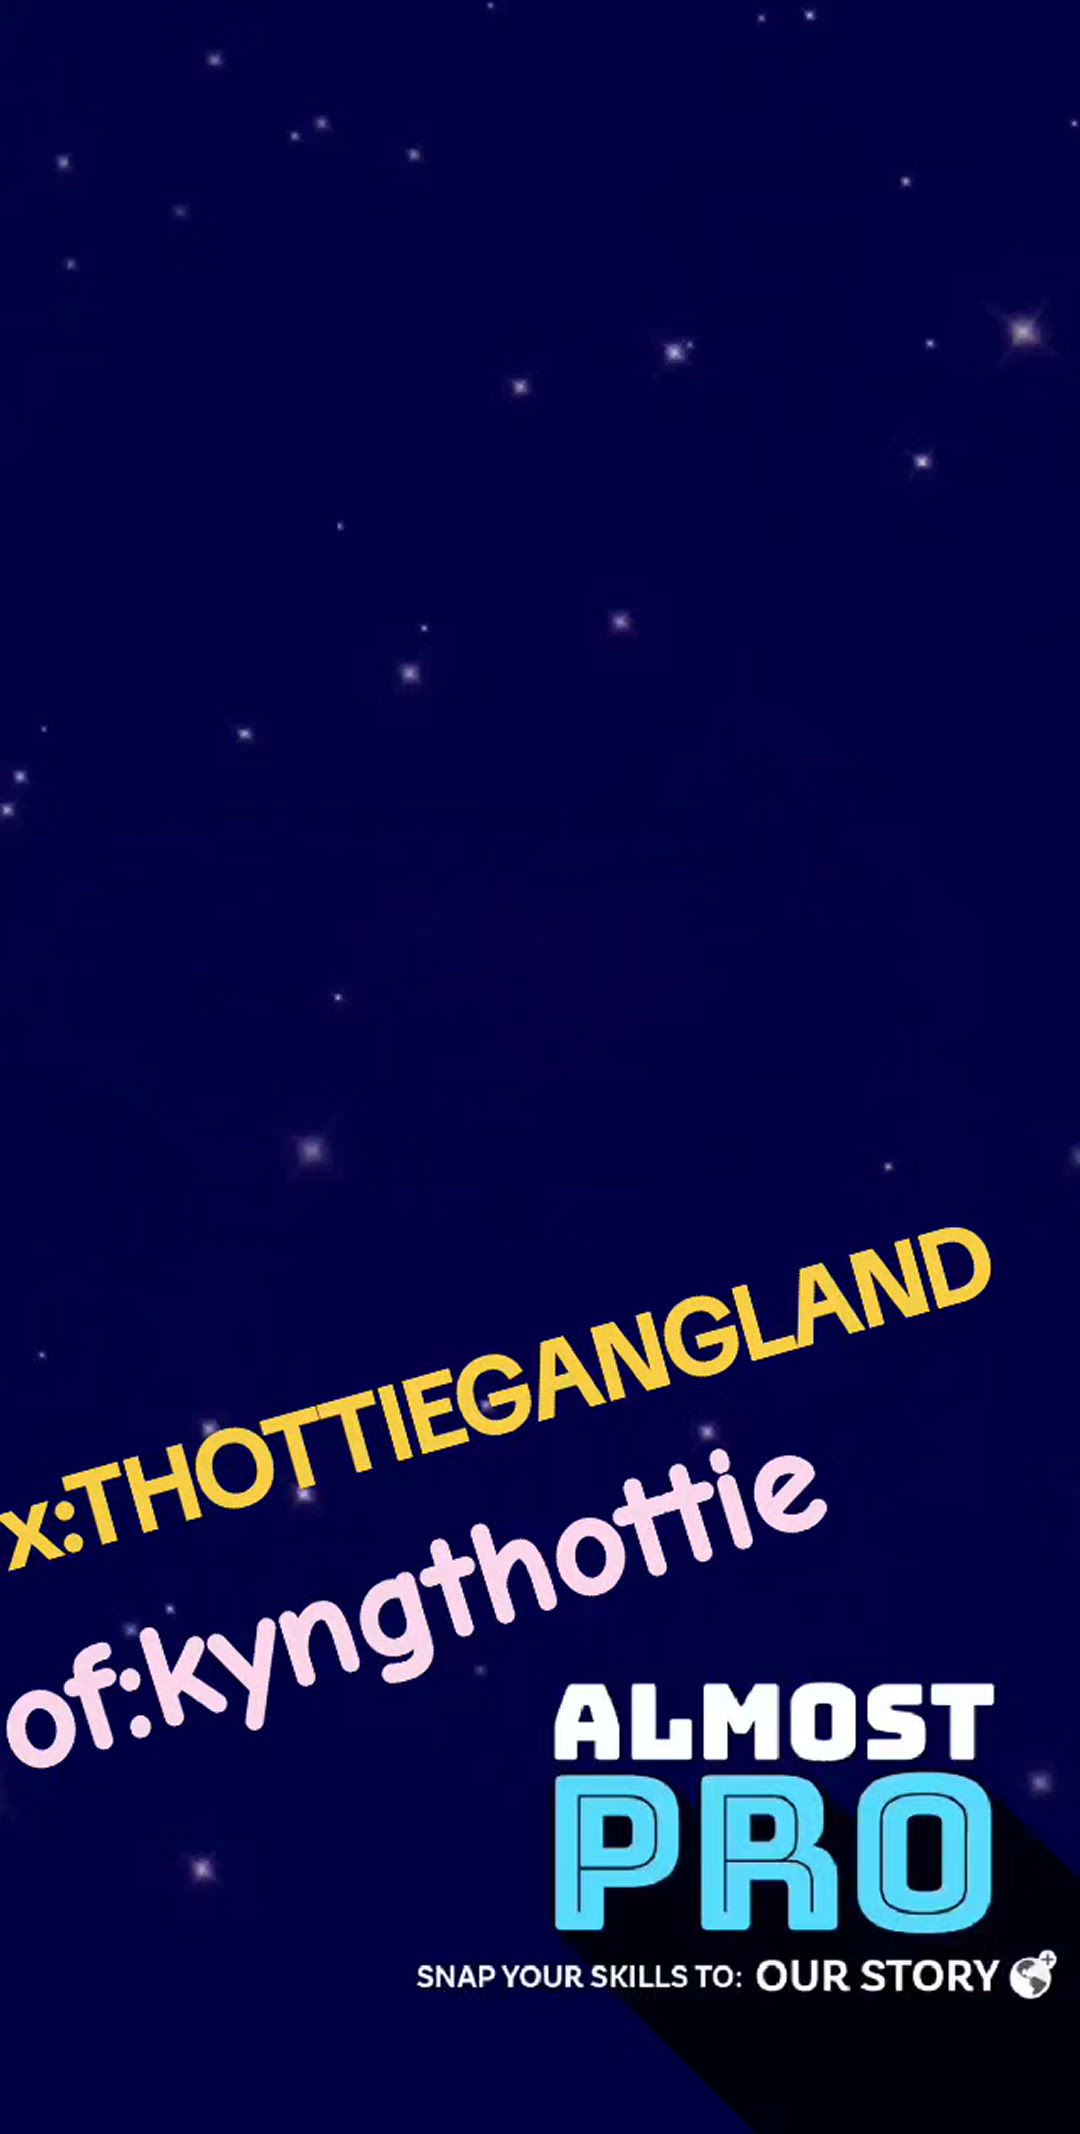 Ass porn video with onlyfans model thottiegangland <strong>@kyngthottie</strong>